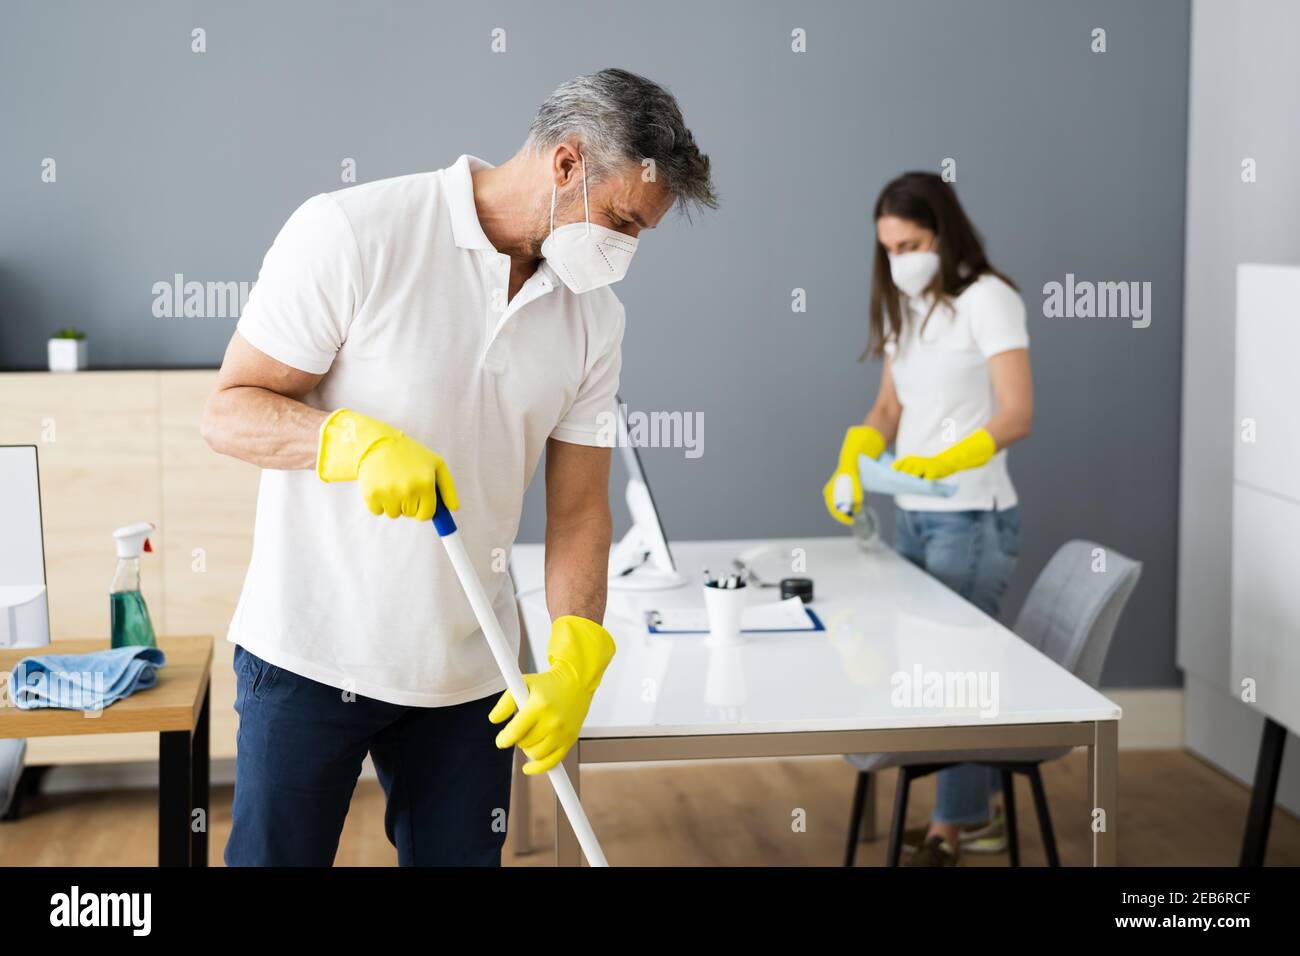 Cleaning Service Janitor Cleaner With Mop In Face Mask Stock Photo